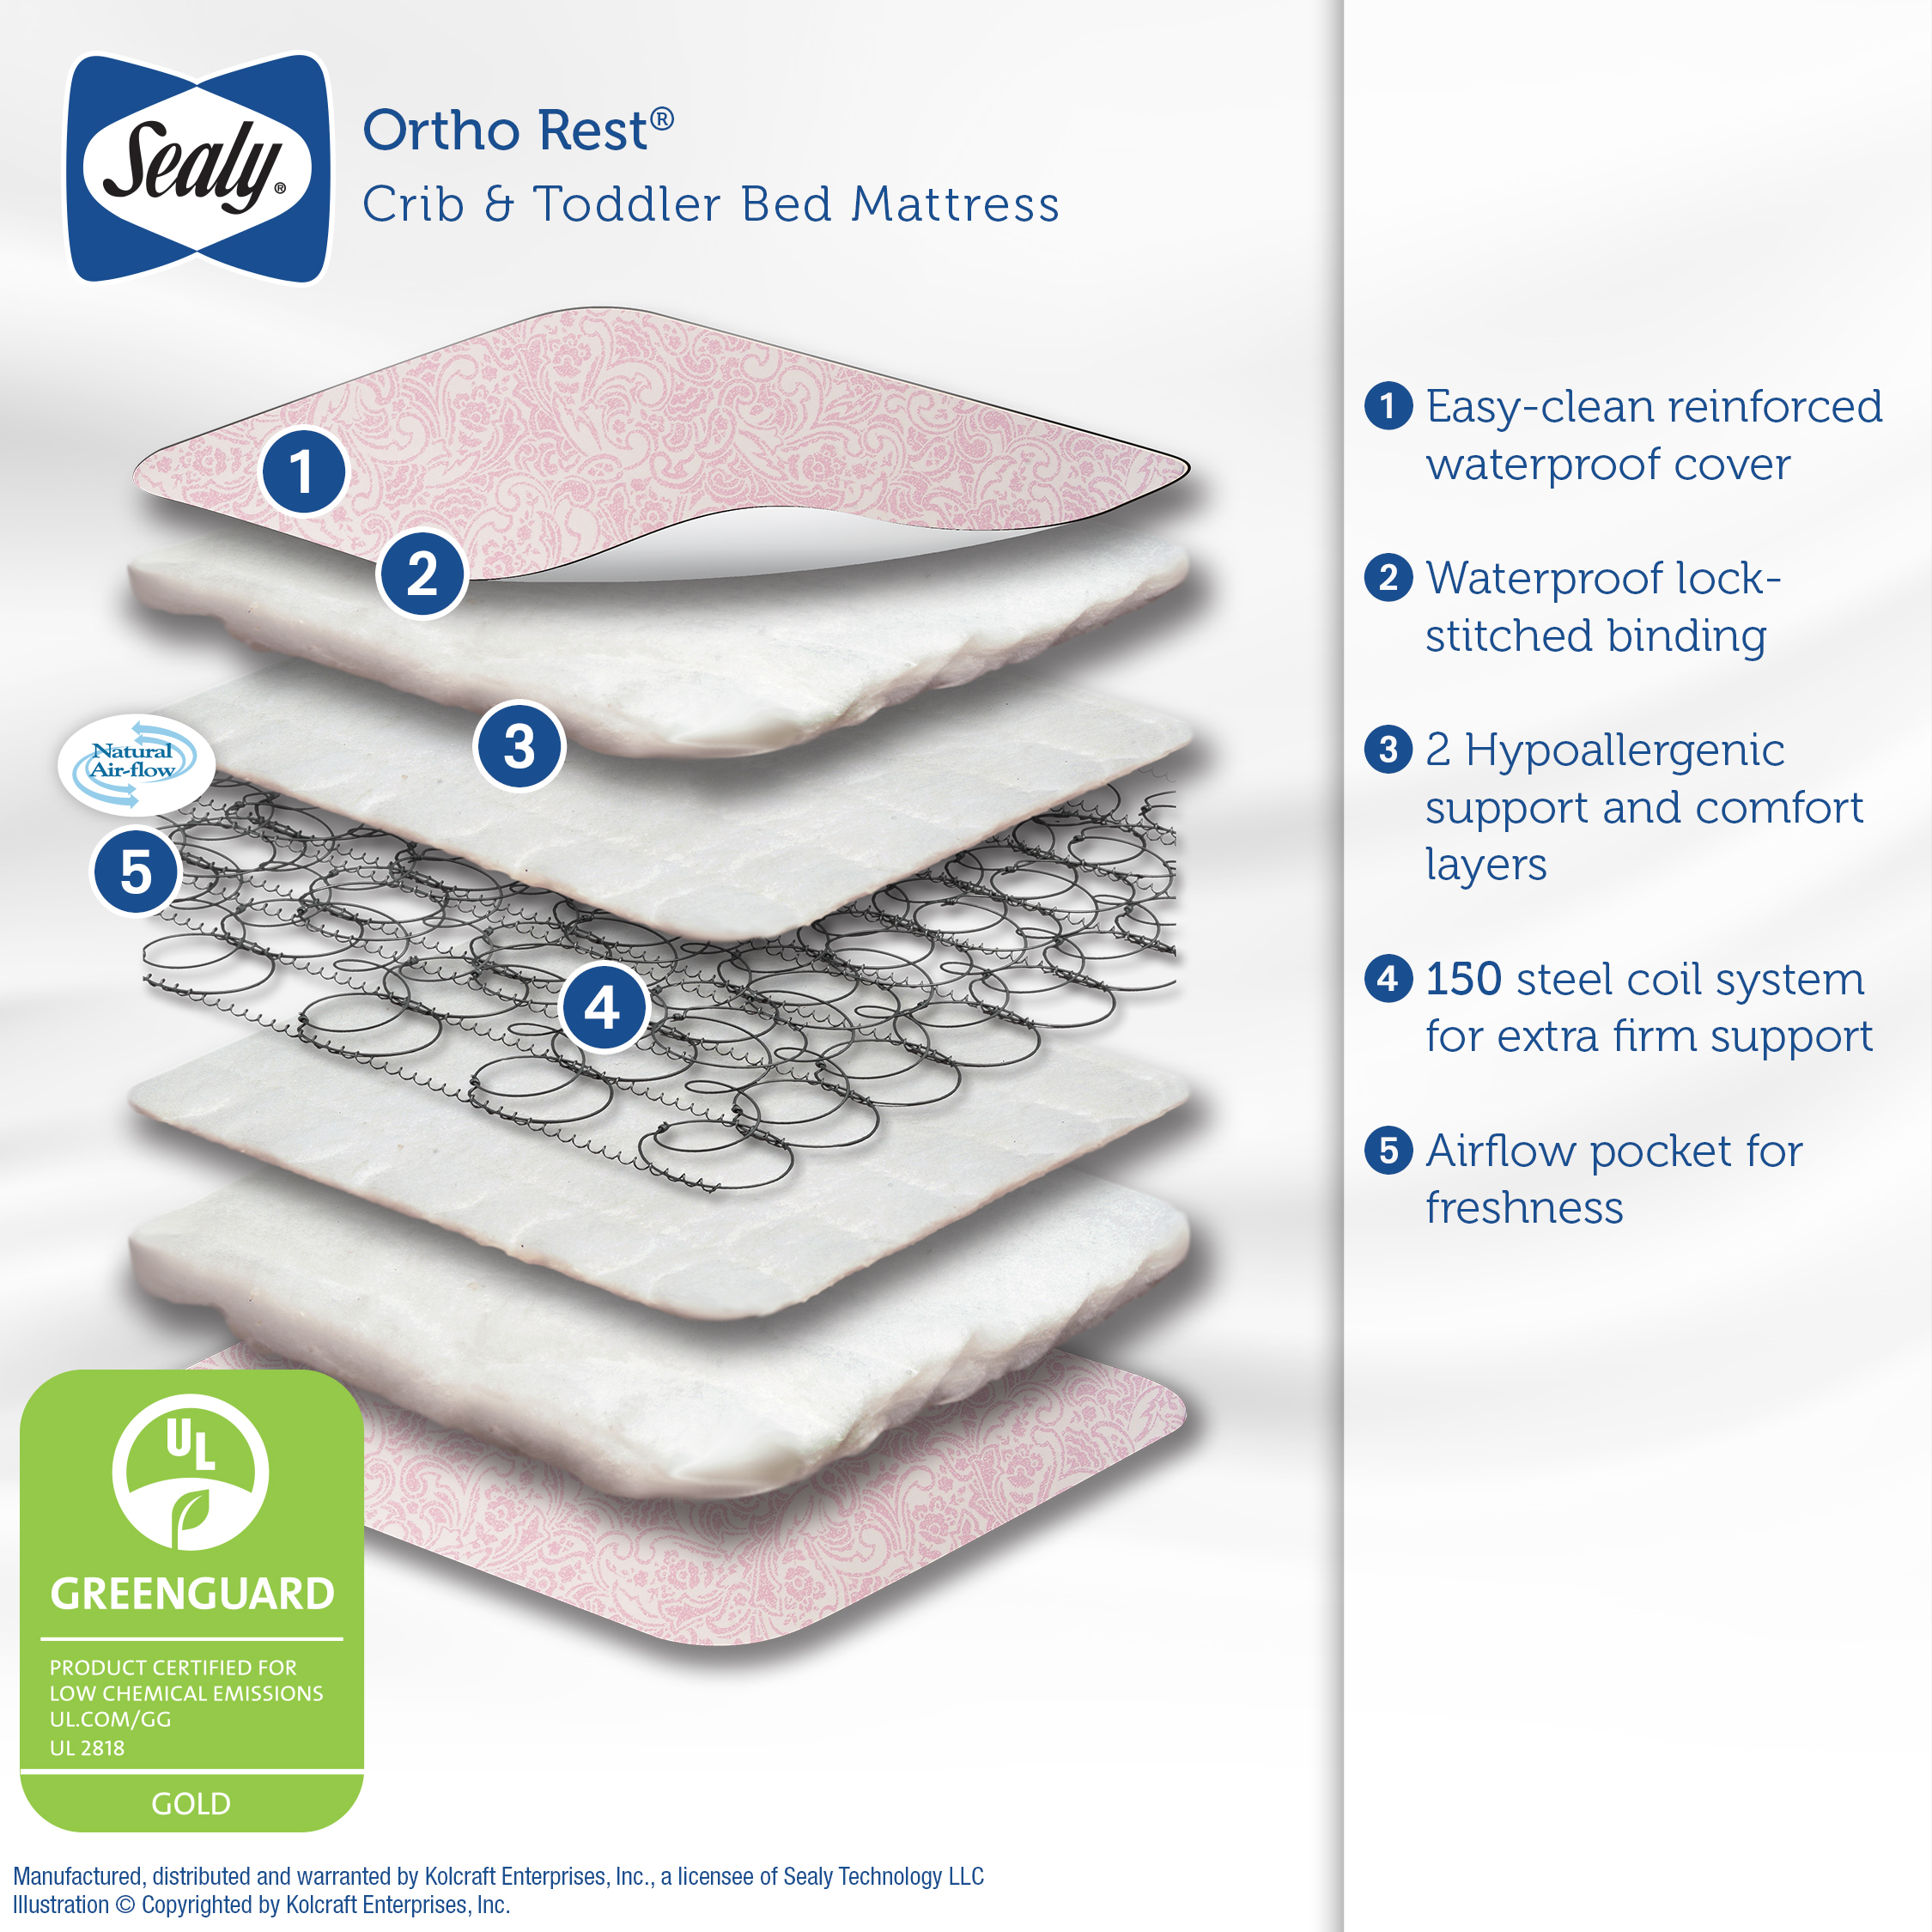 Sealy Ortho Rest Premium Firm Baby Crib & Toddler Mattress, 150 Coil, Pink - image 3 of 13